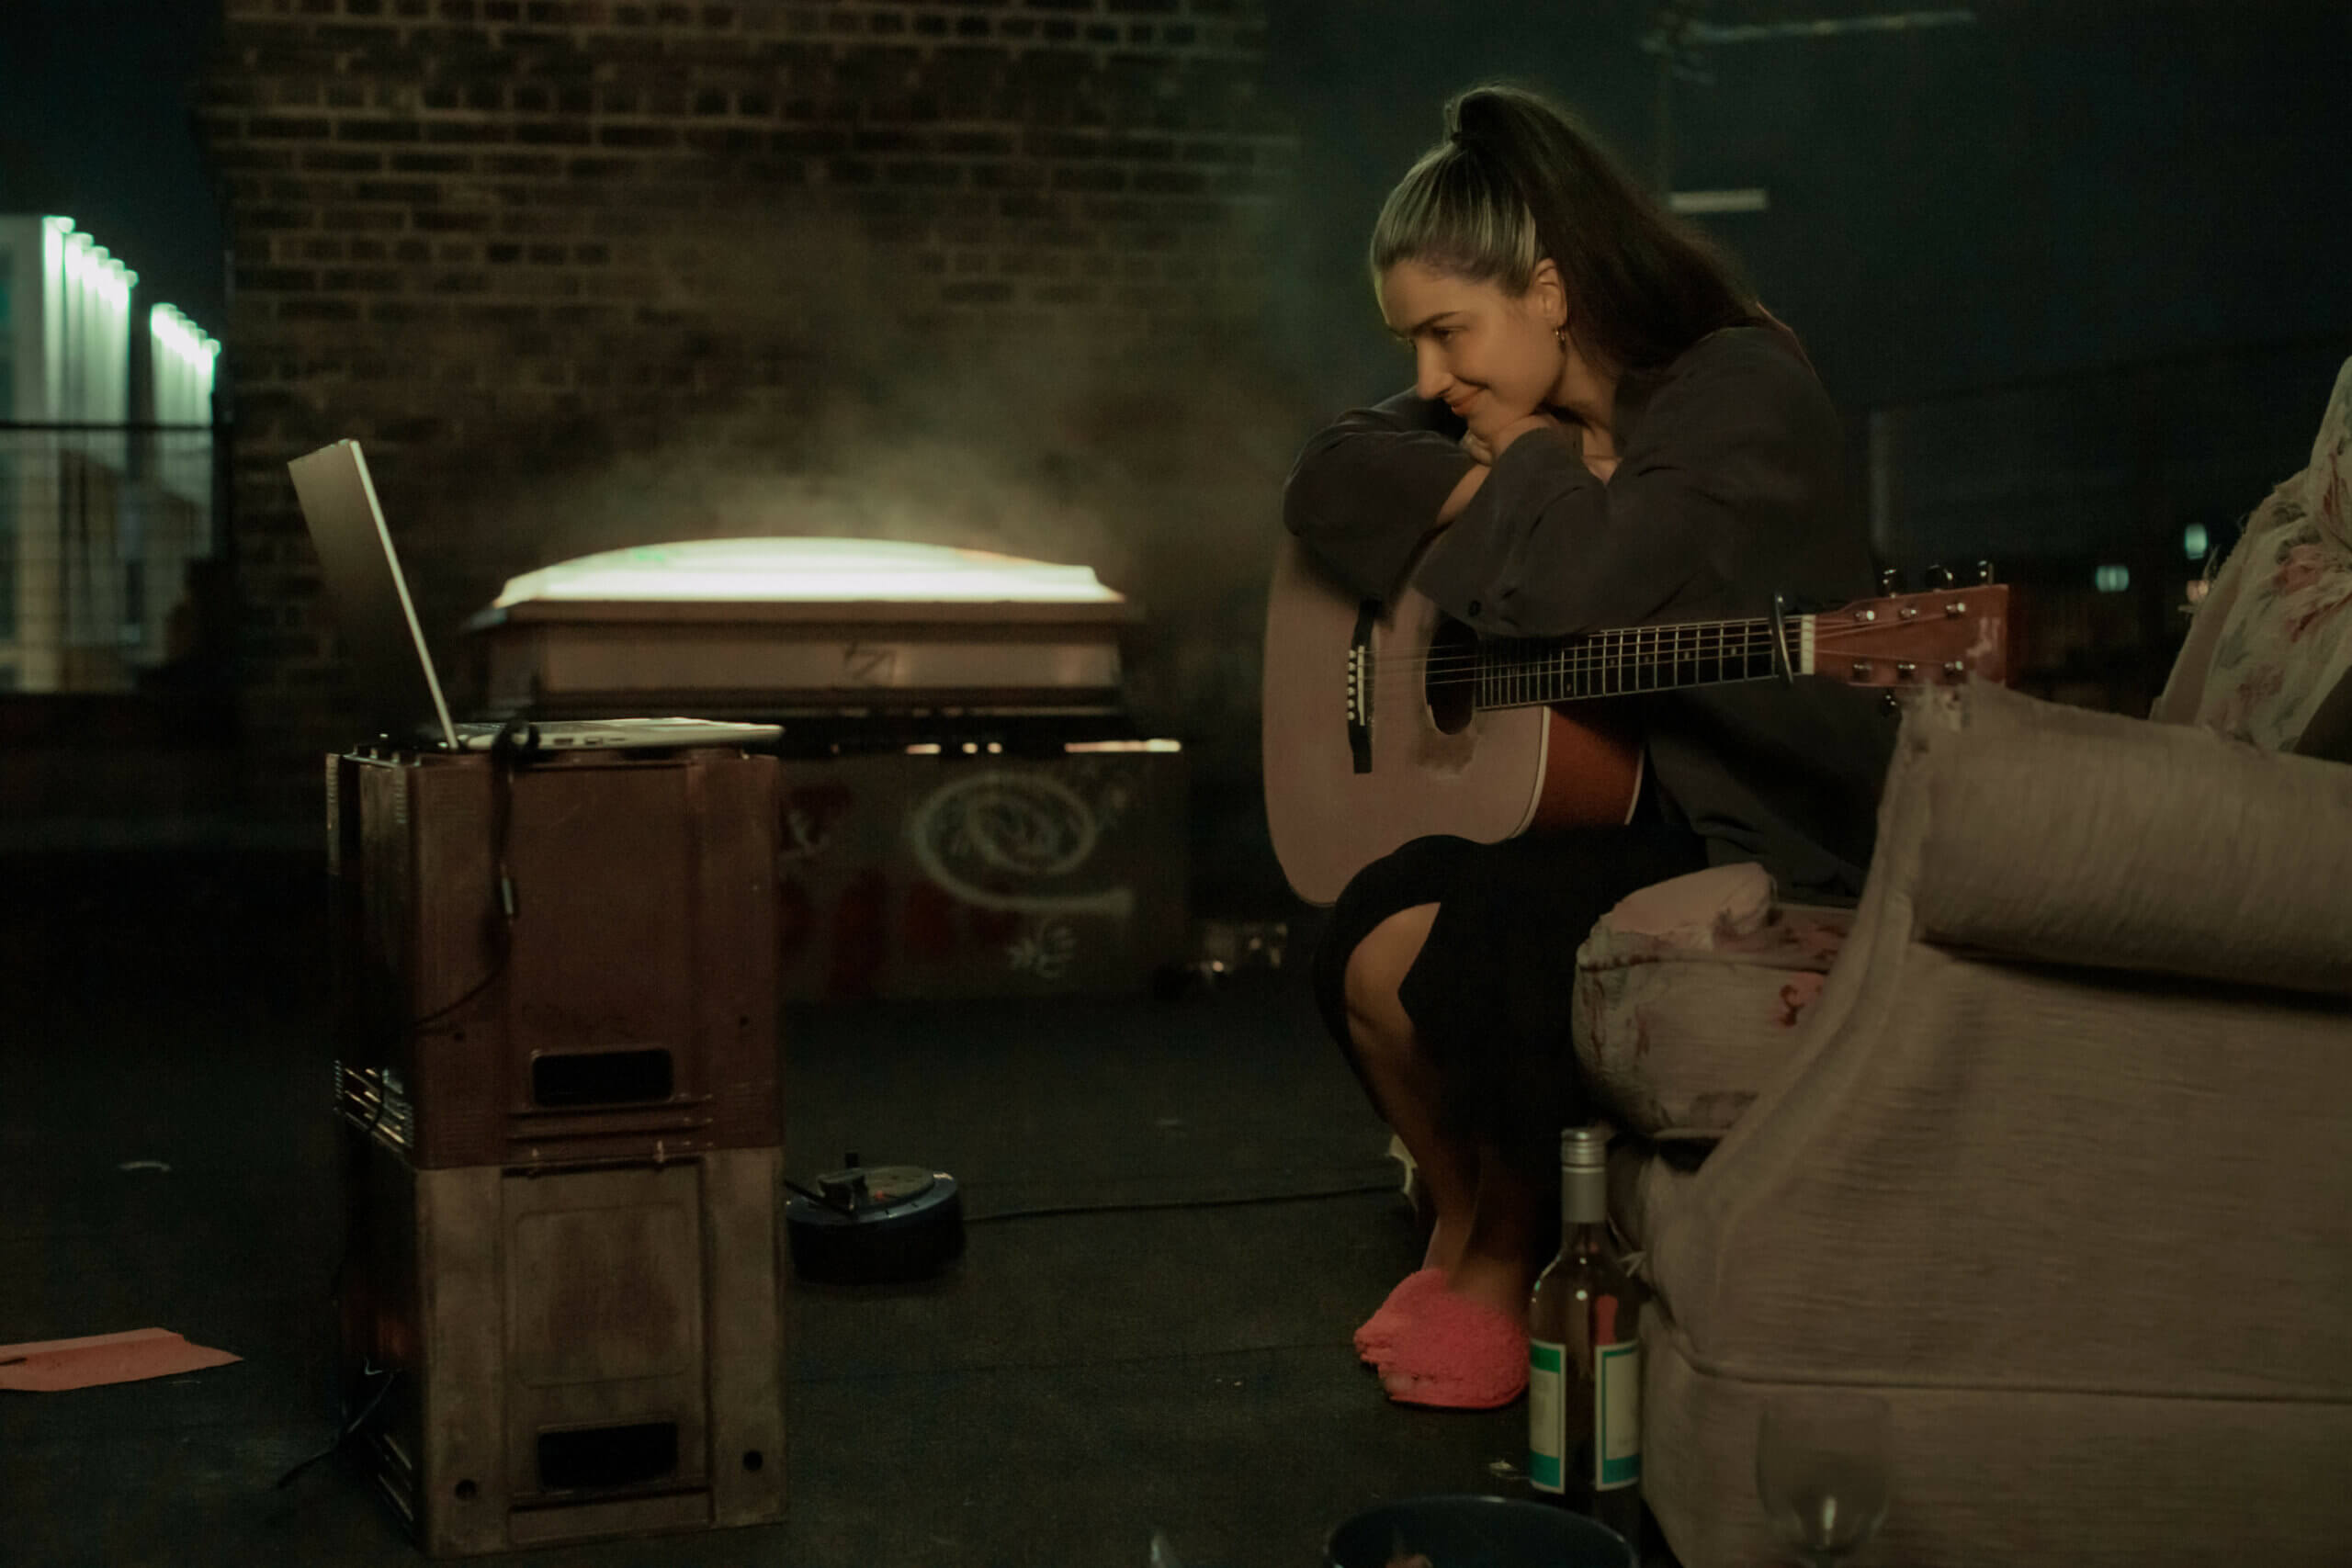 Eve Hewson sitting with a guitar listening to music inside.